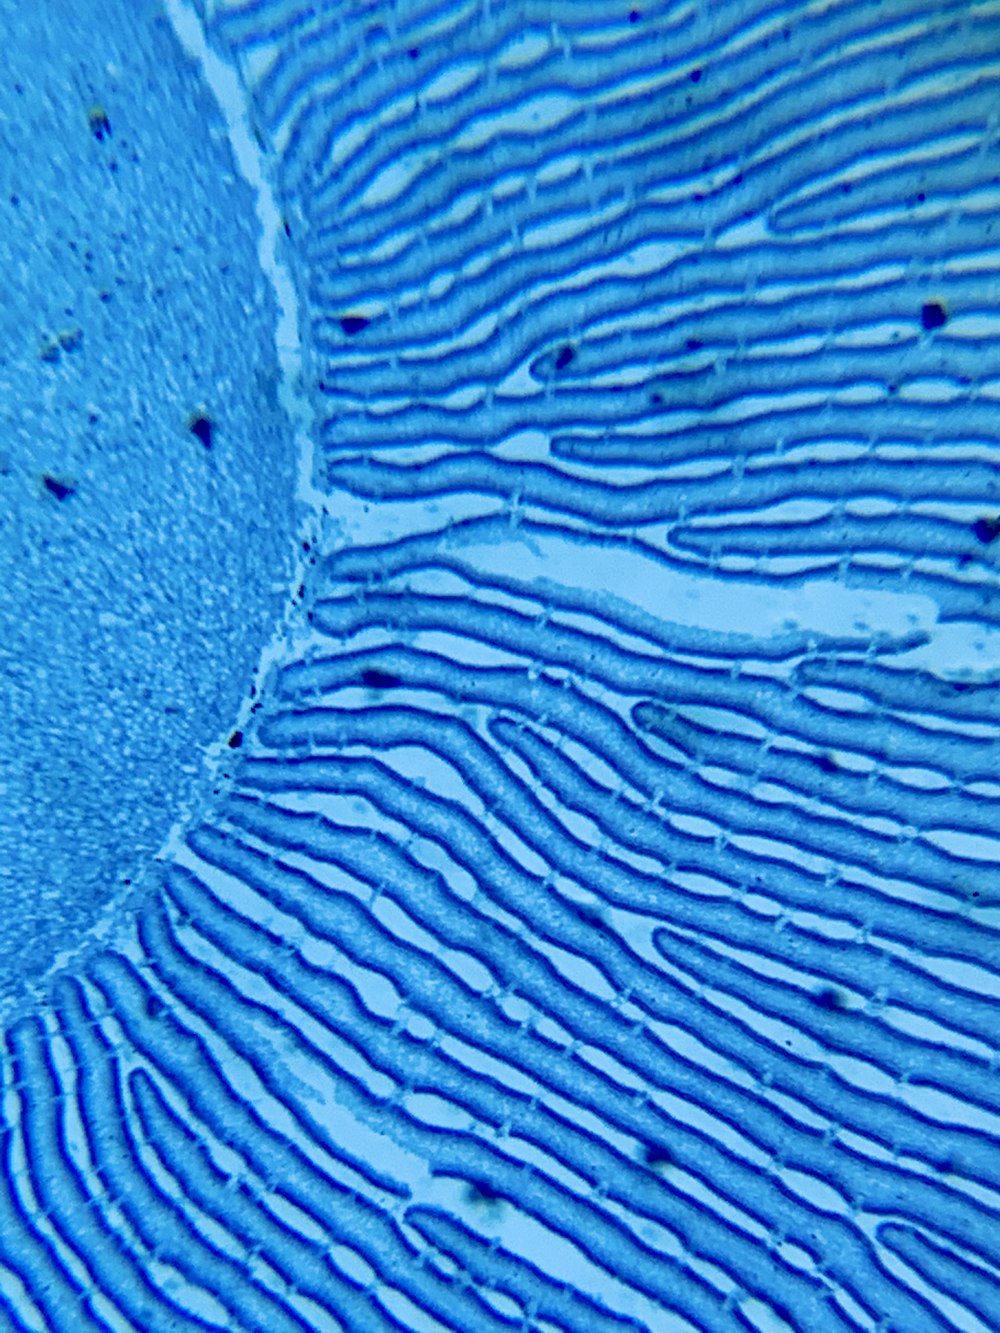 a close up view of a blue substance